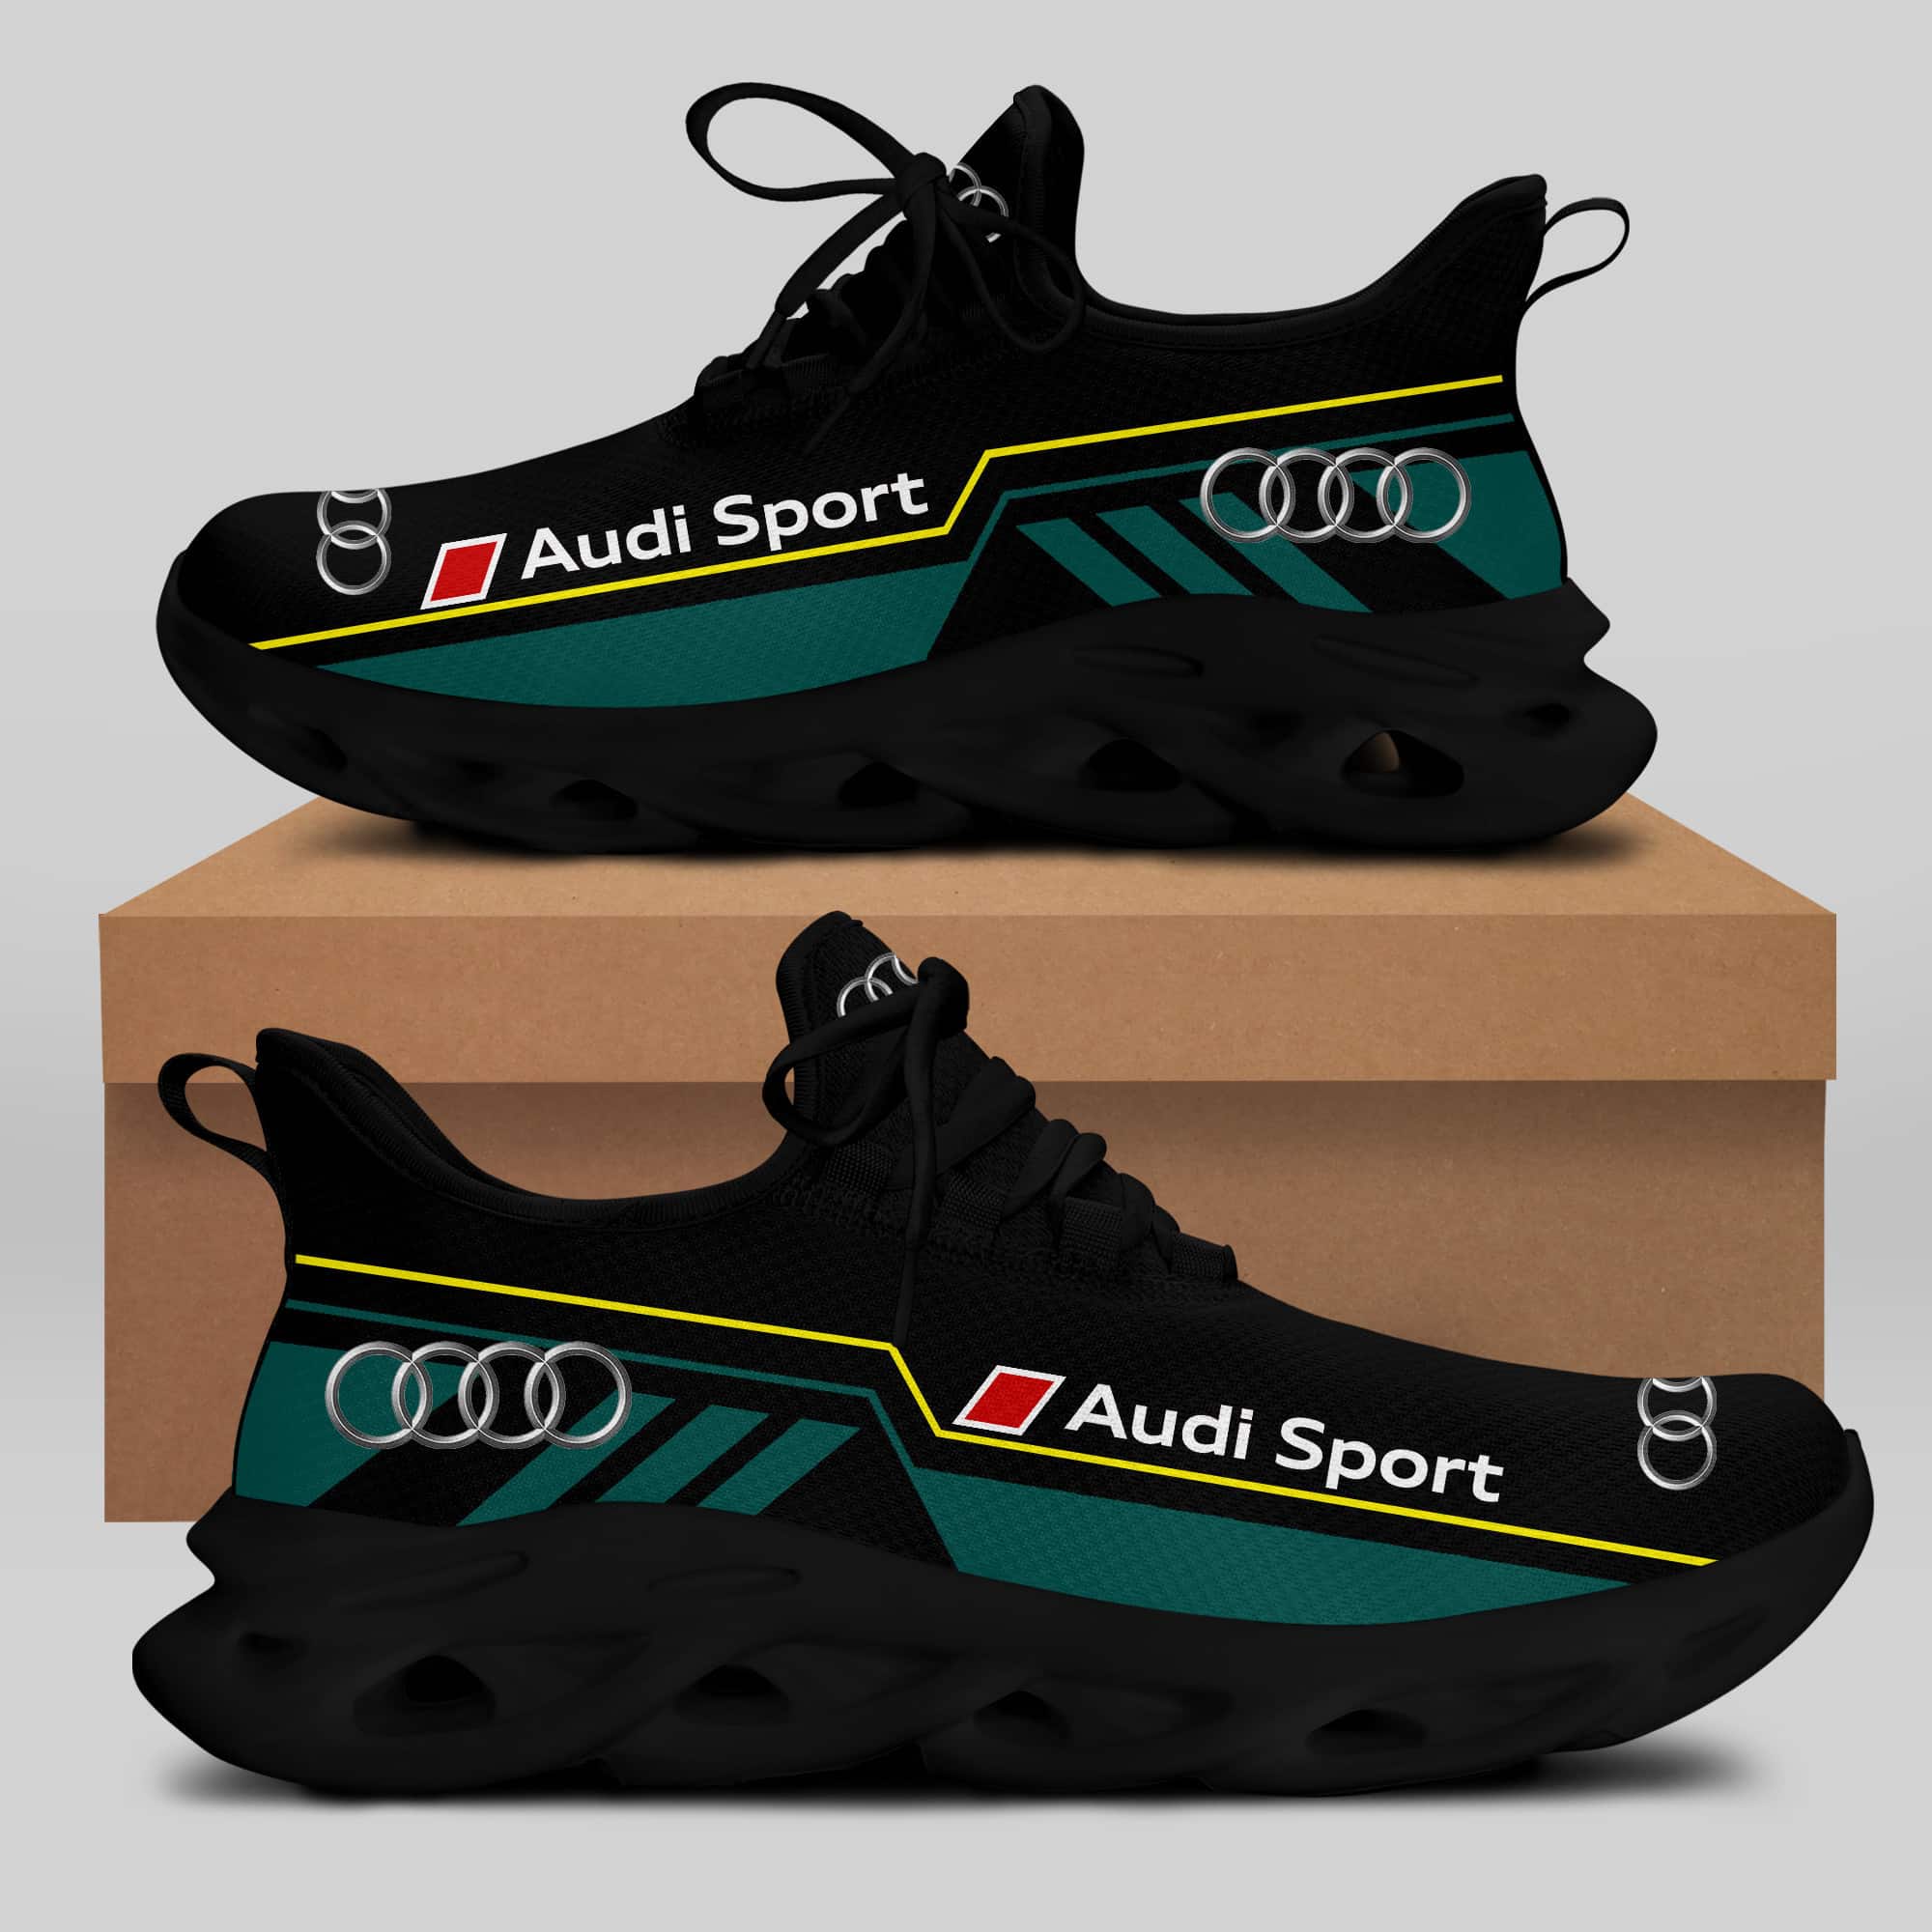 Audi Sport Running Shoes Max Soul Shoes Sneakers Ver 38 1